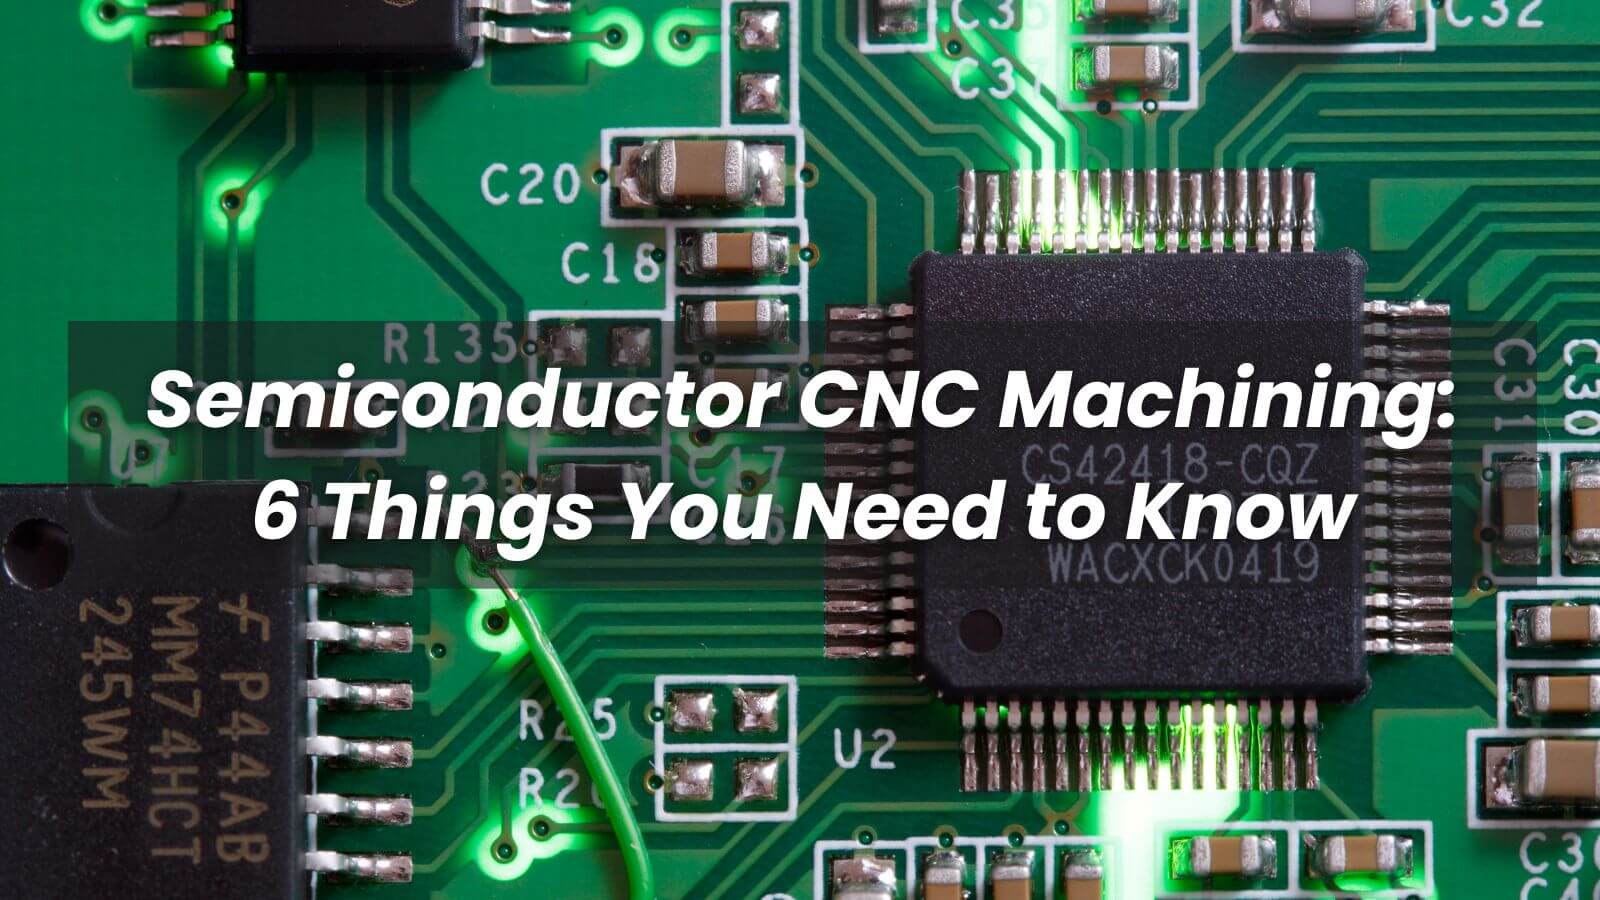 Semiconductor CNC Machining 6 Things You Need to Know